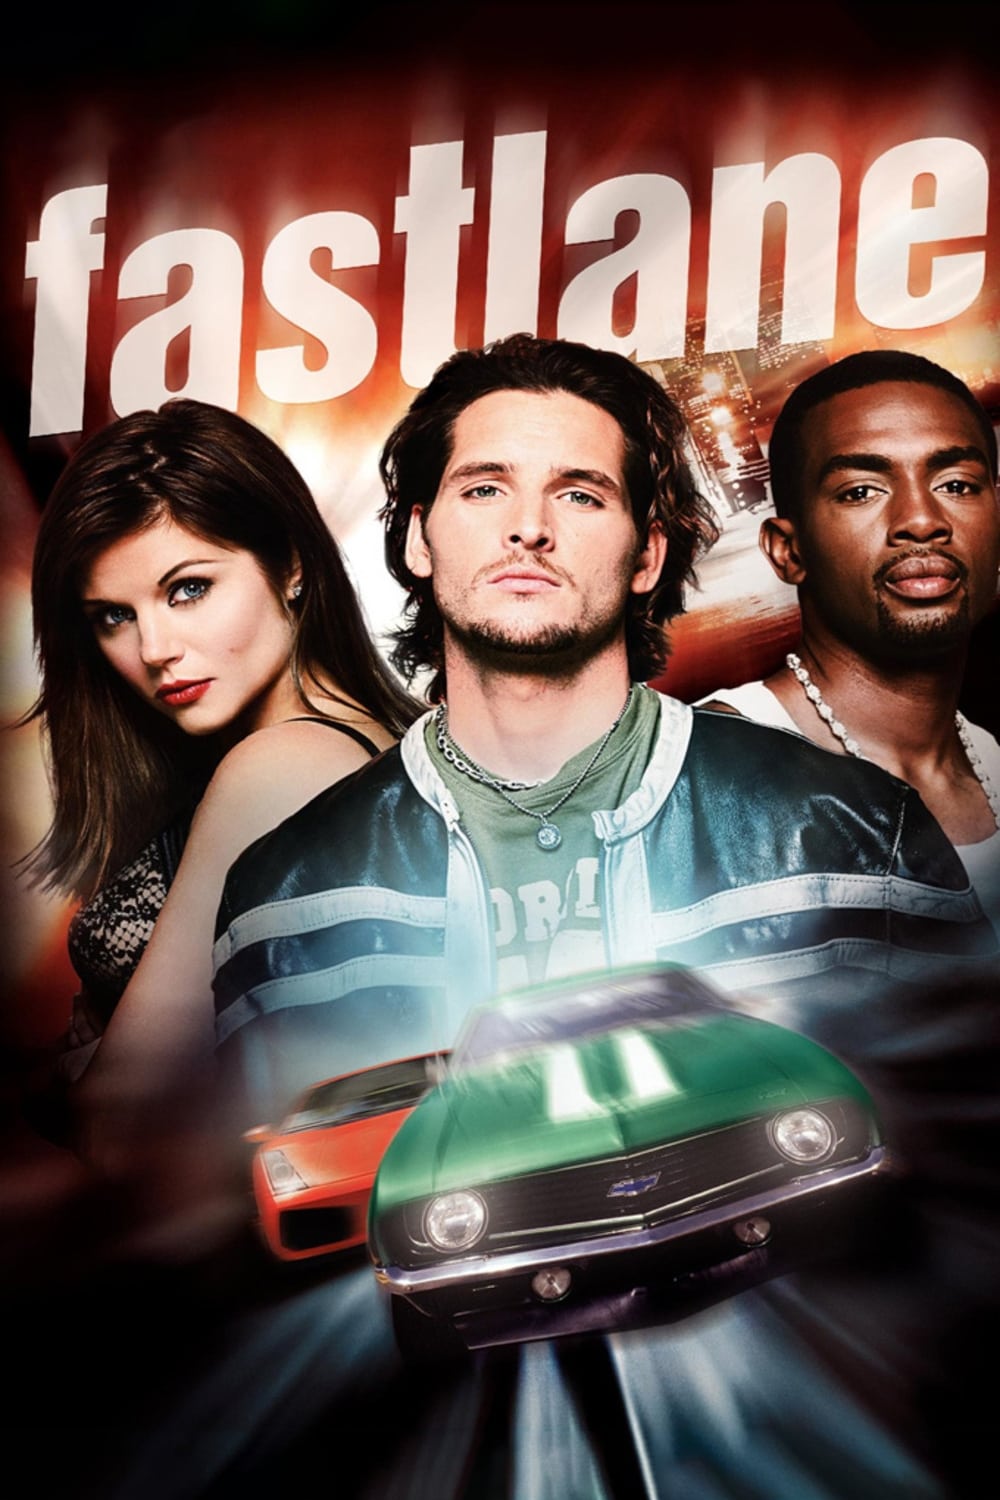 Fastlane TV Shows About Undercover Agent